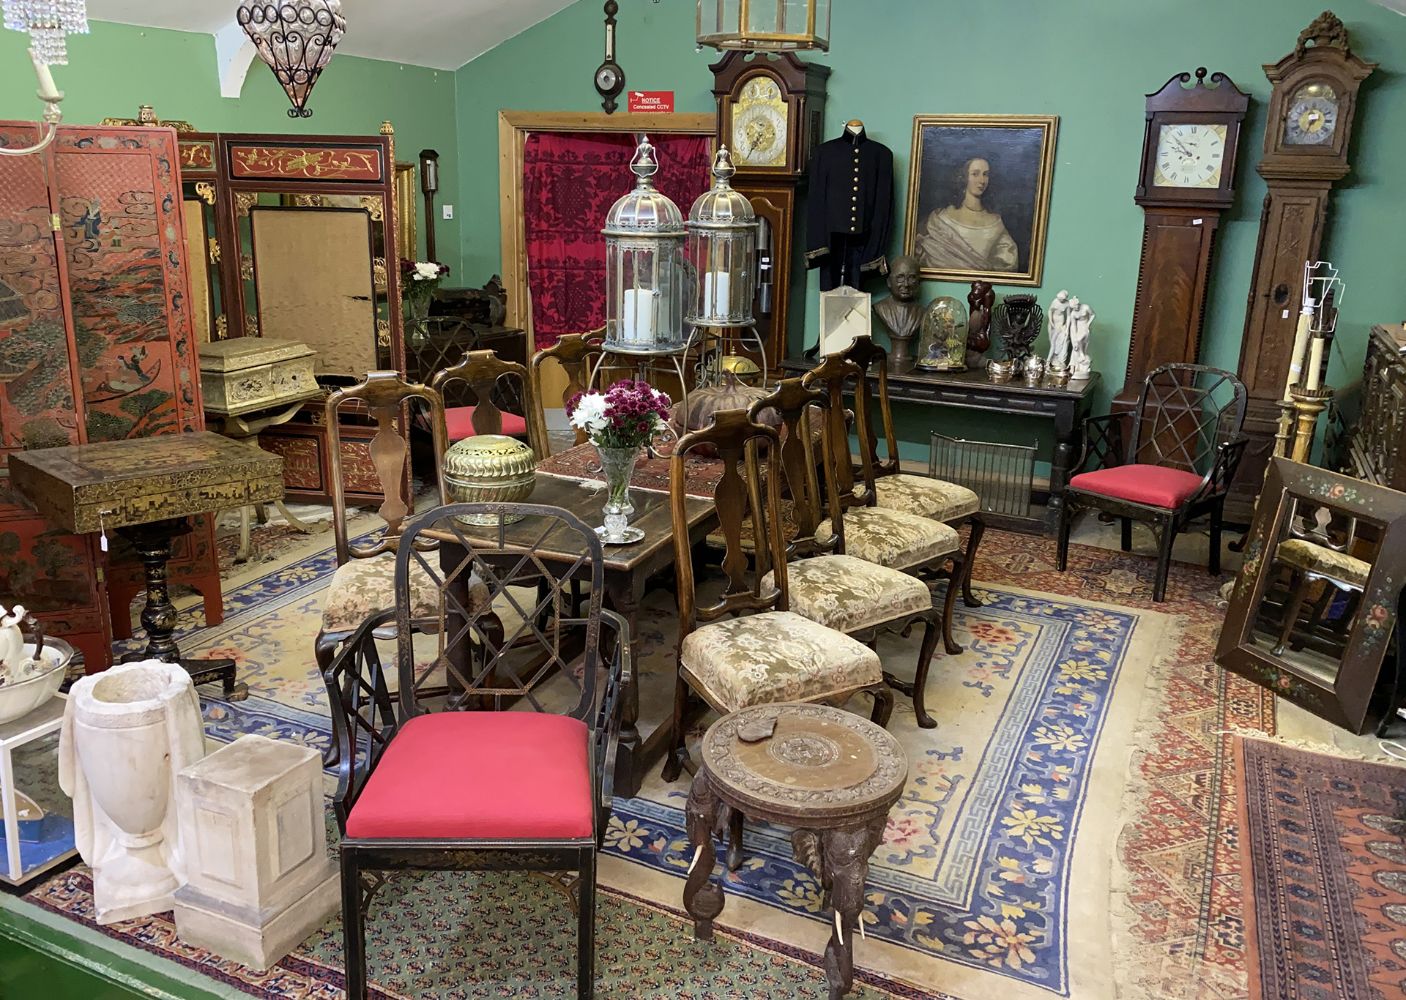 Special February Auction of Miscellaneous Objets d'Art, Collectables, Porcelain, Glass, Antique & Country Furniture